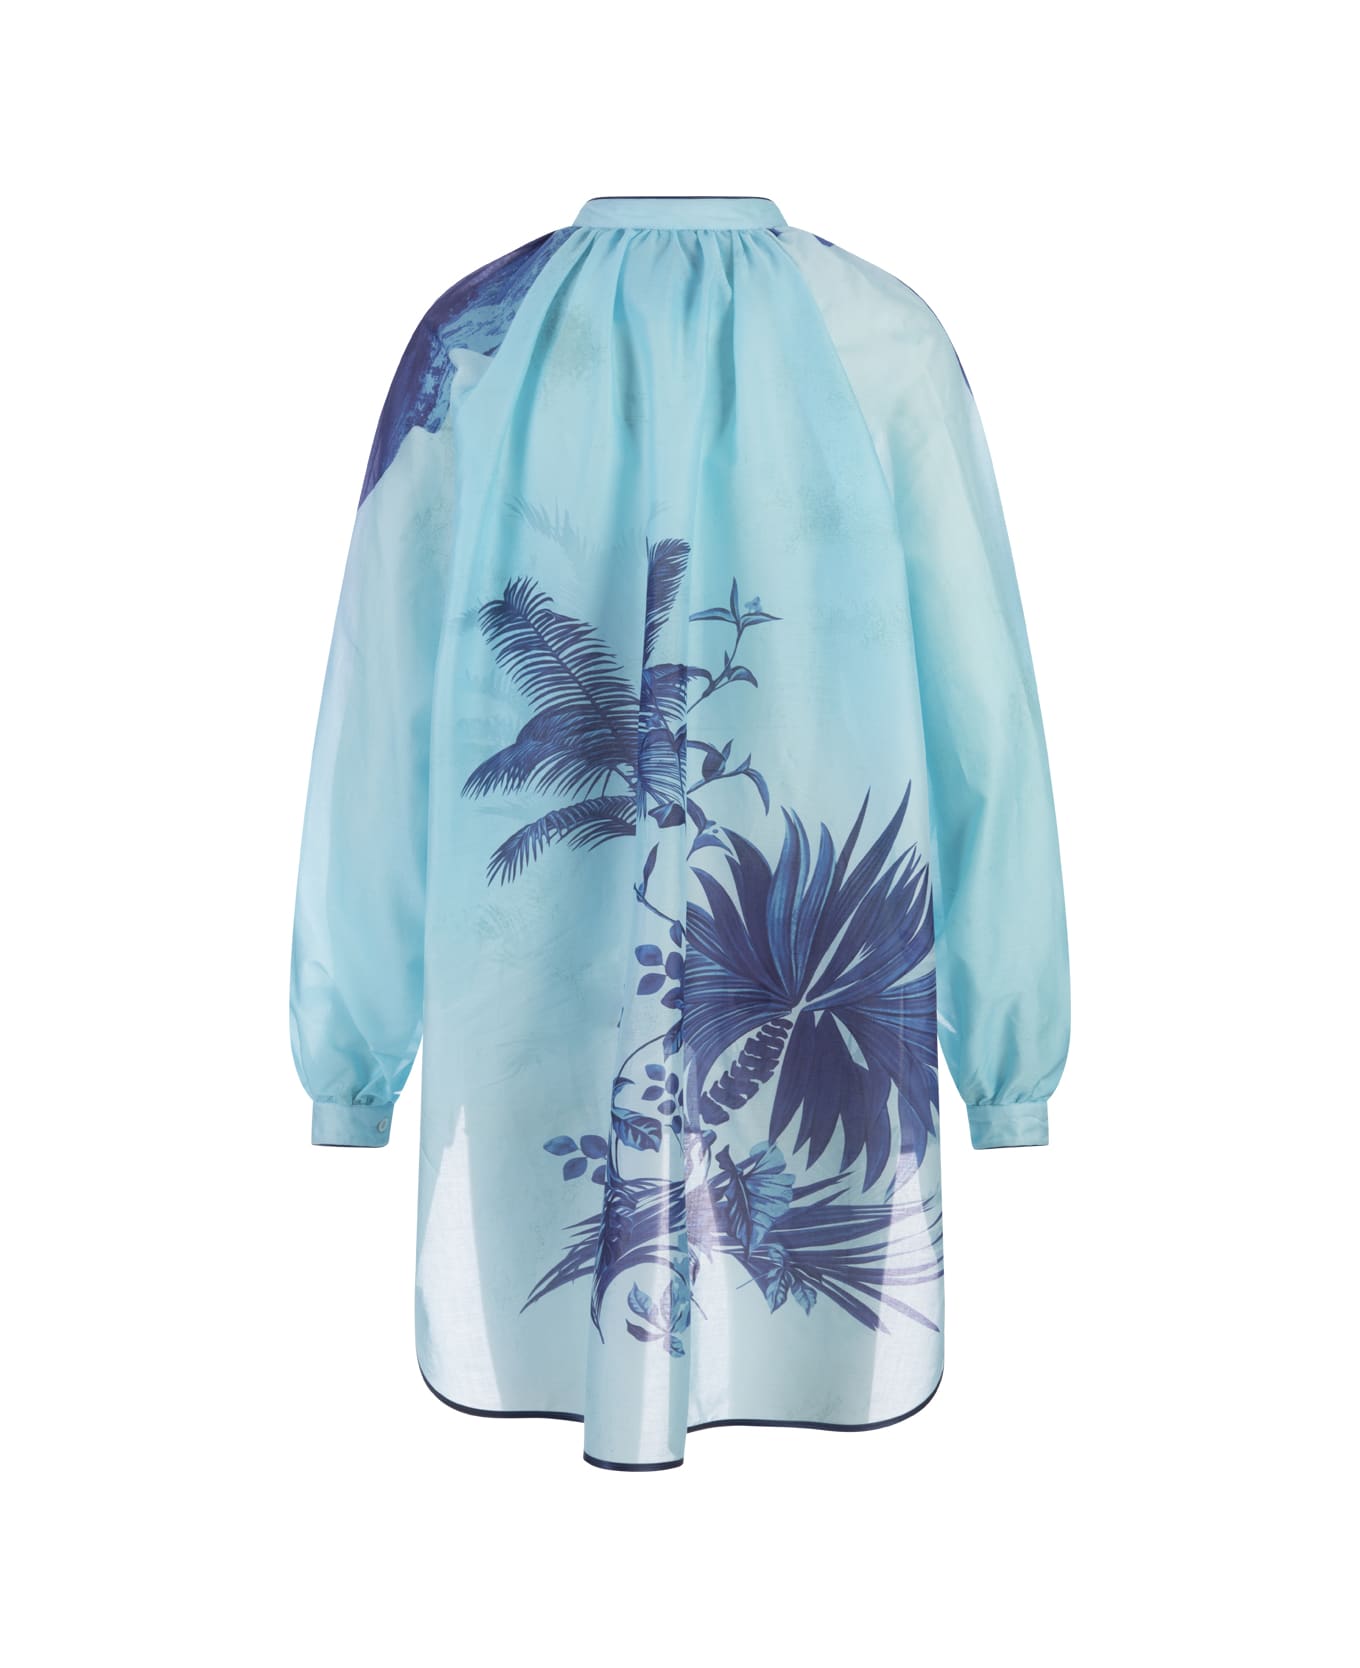 For Restless Sleepers Flowers Blue Tizio Shirt - Blue